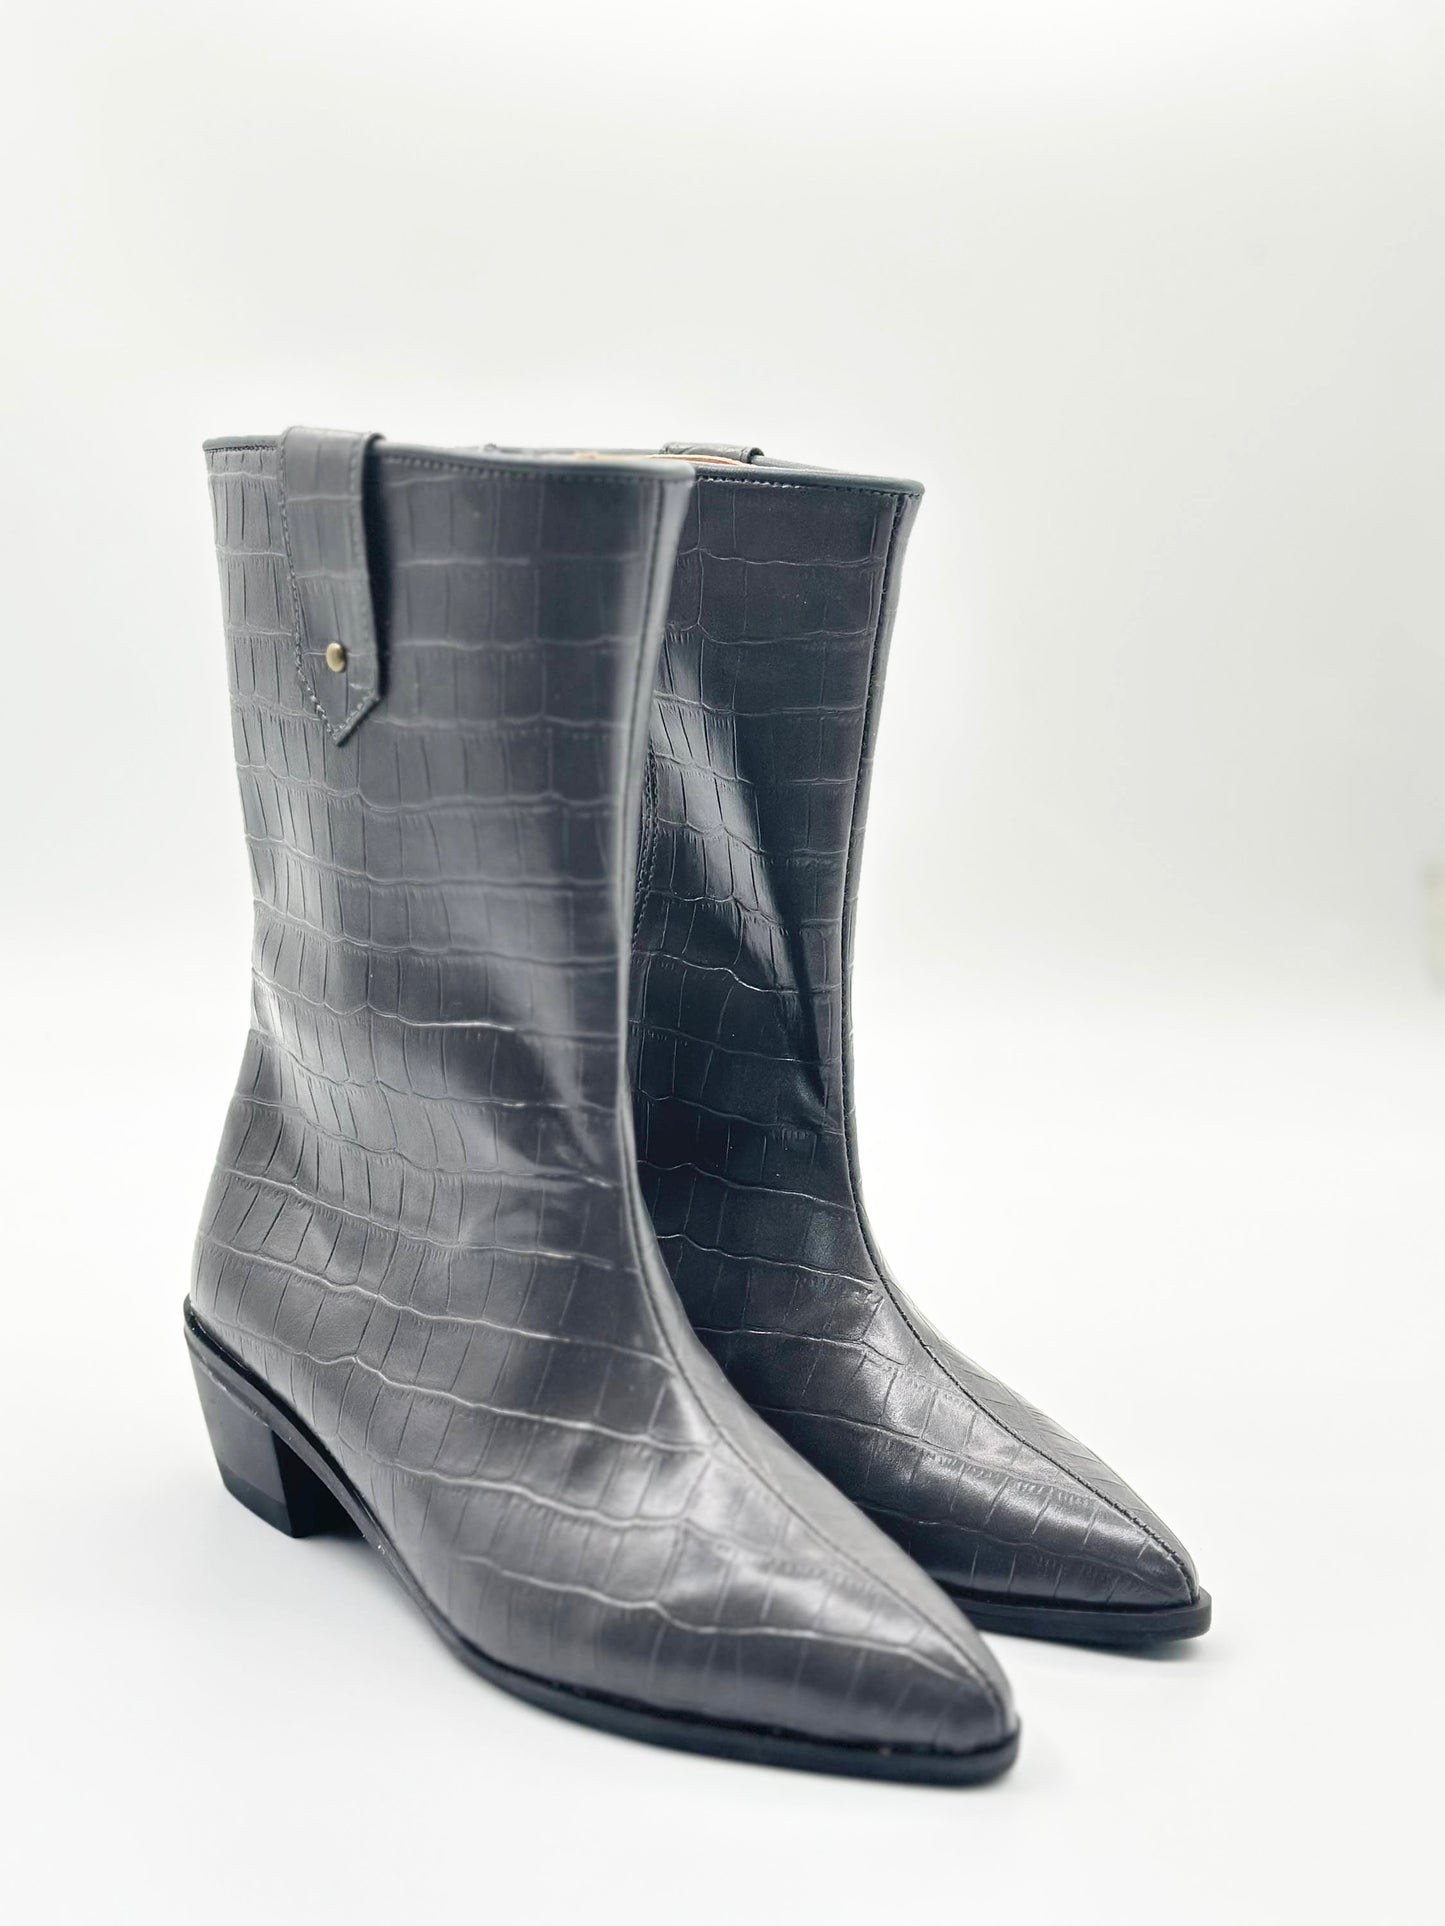 Cool Grey The Rack Collection Boots